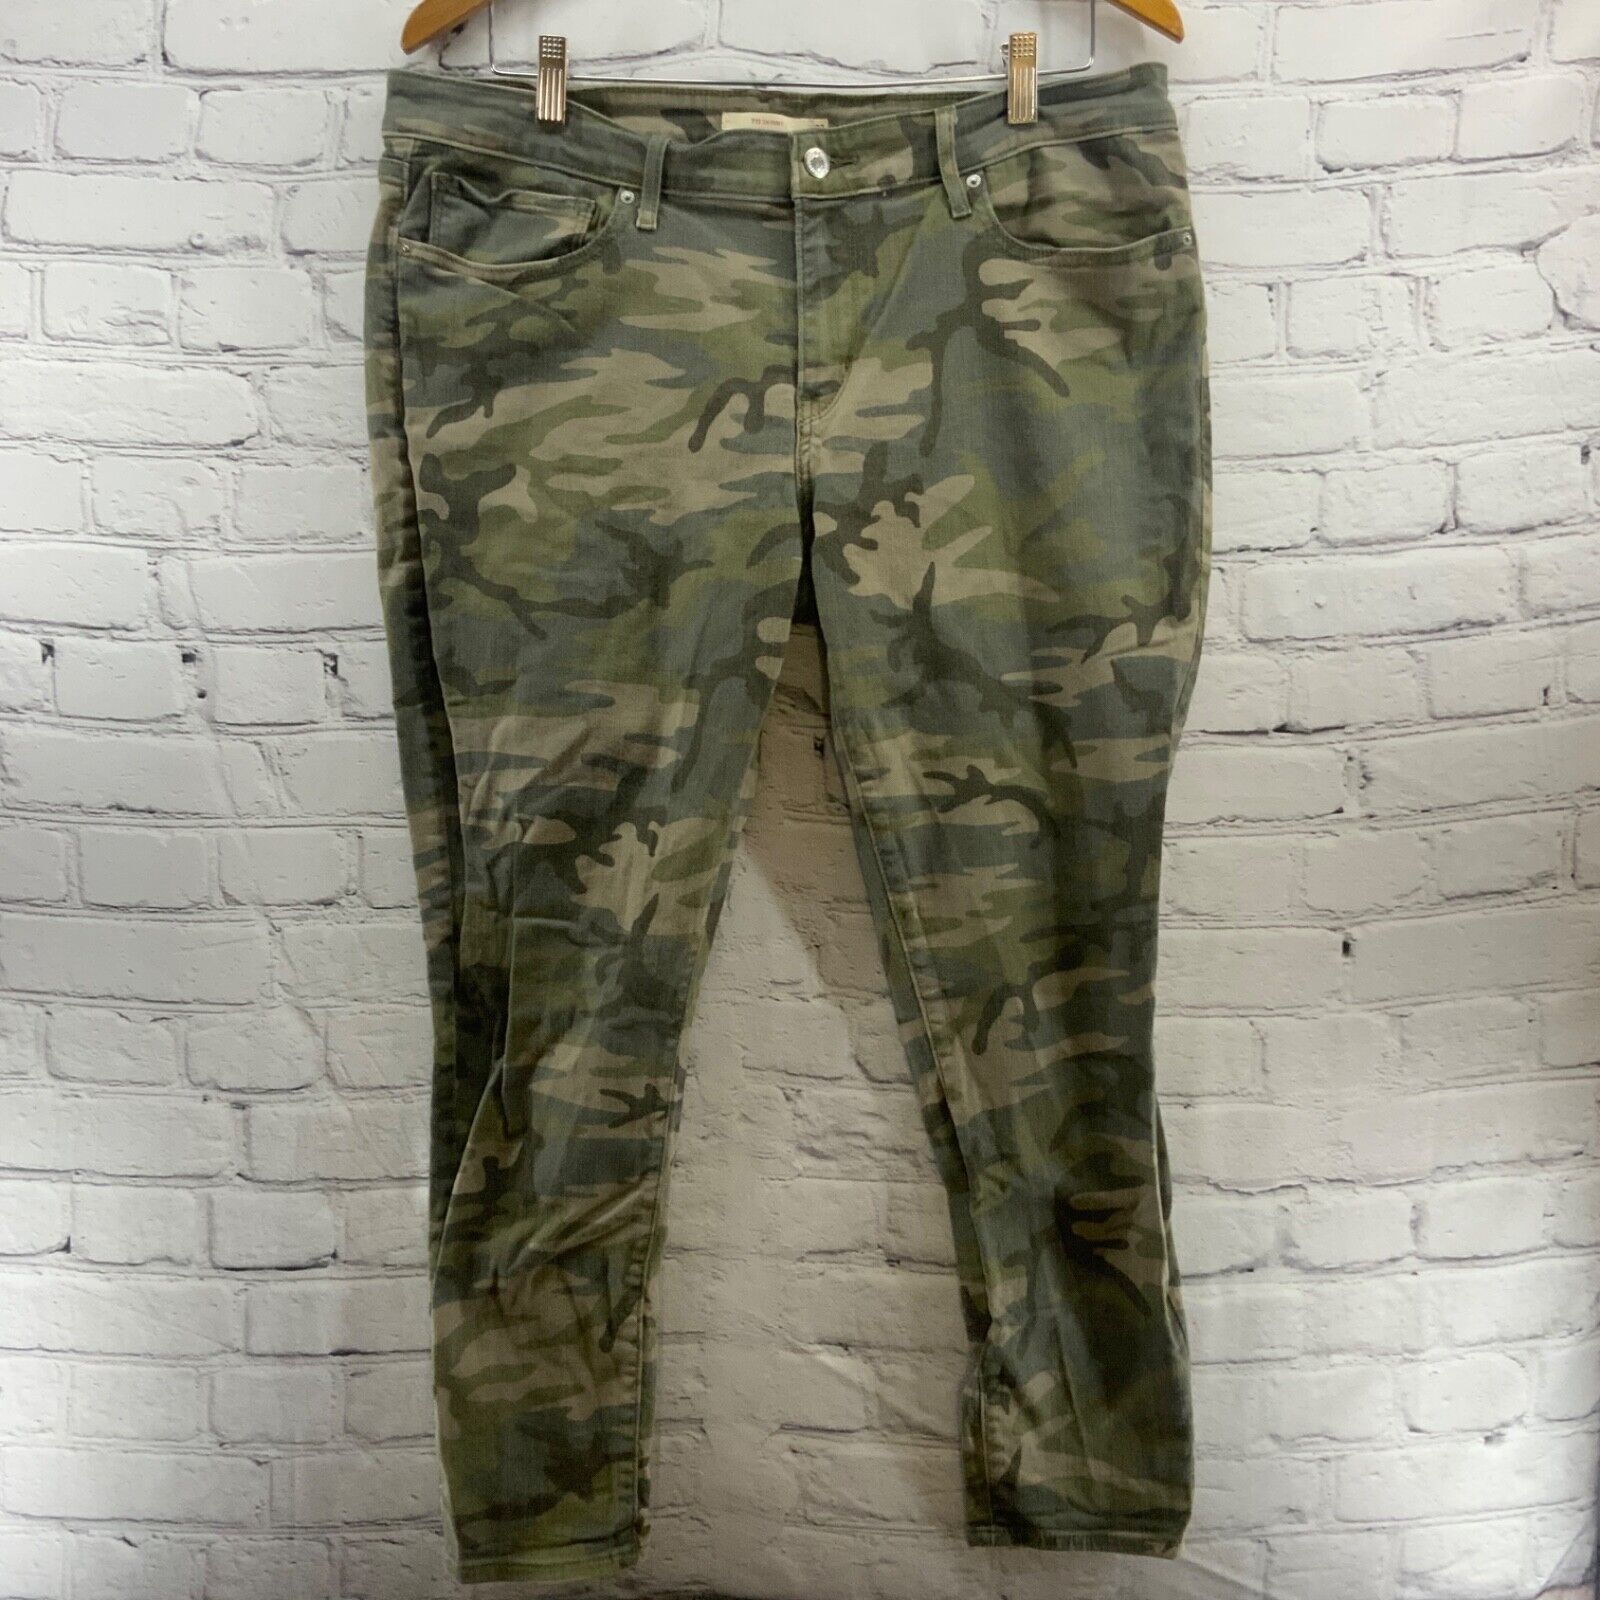 Primary image for Levis 711 Skinny Jeans Camo Green Womens Sz 33"